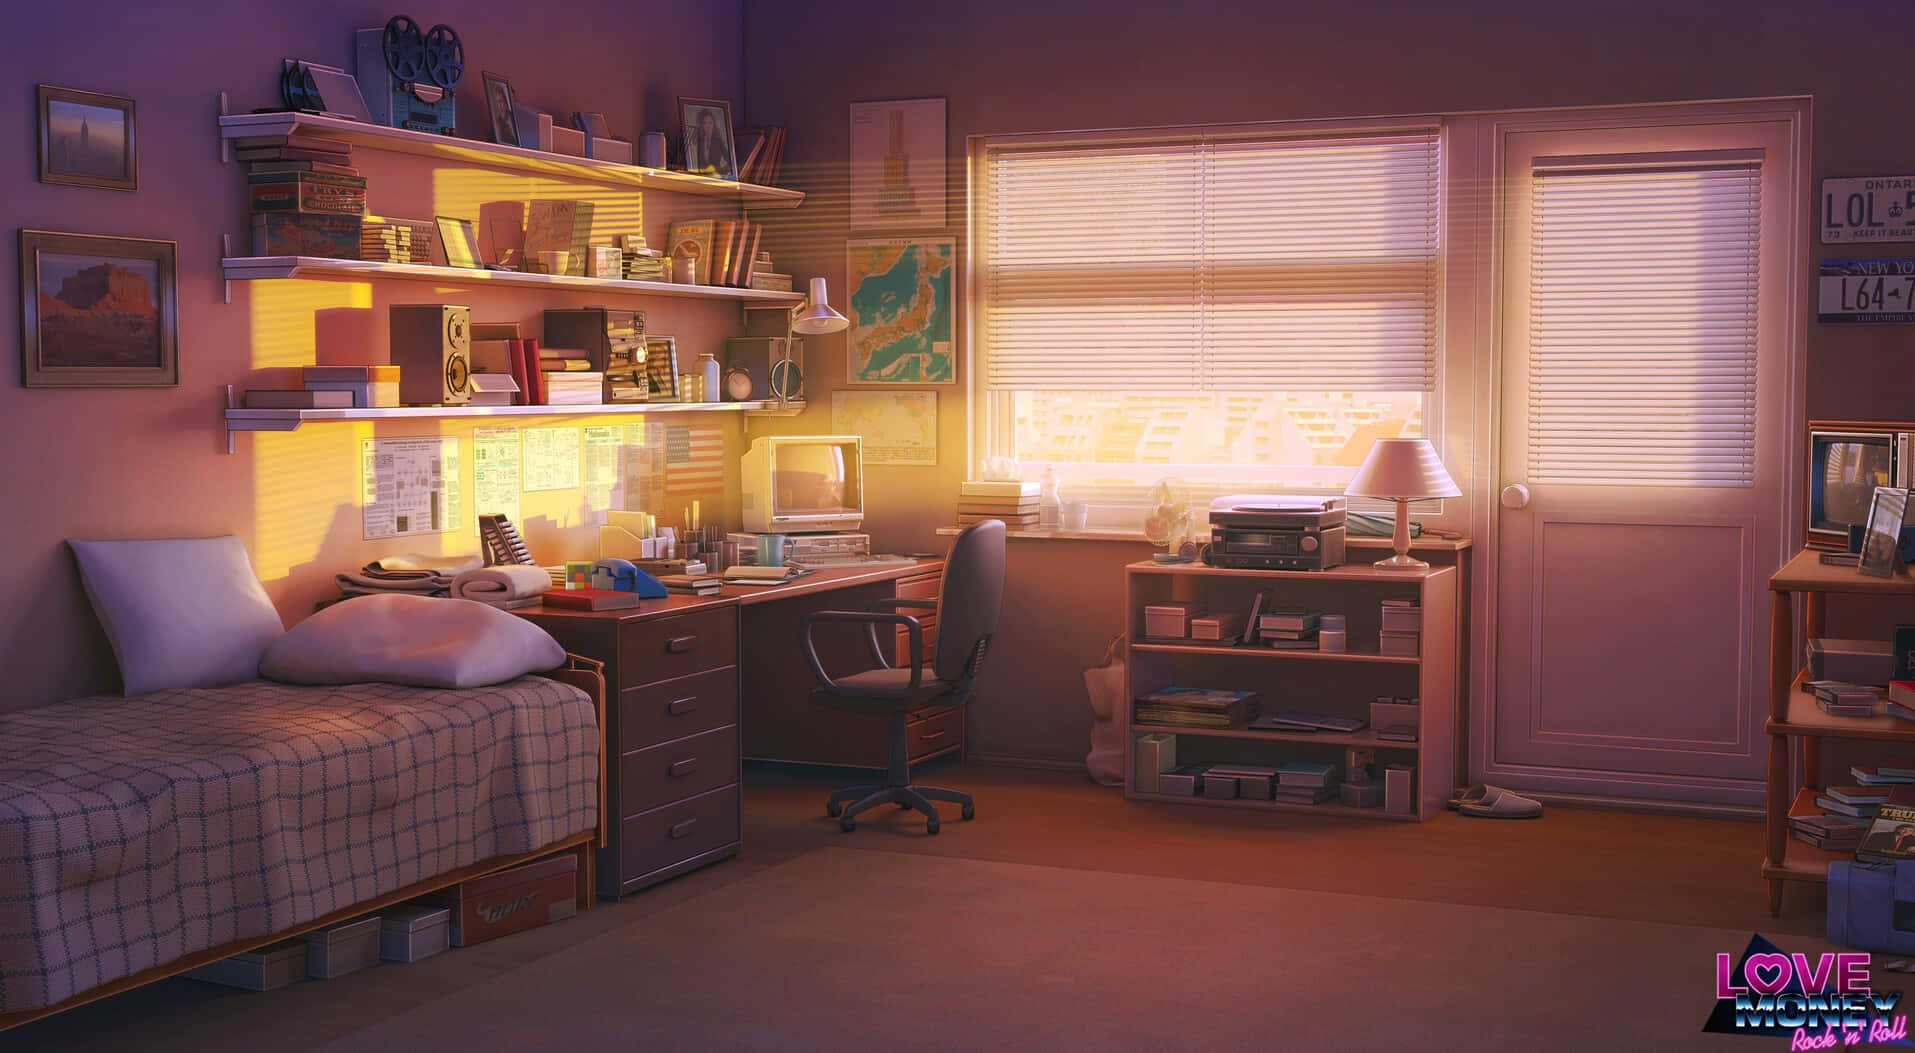 Page 2  Anime Bedroom Images  Free Download on Freepik